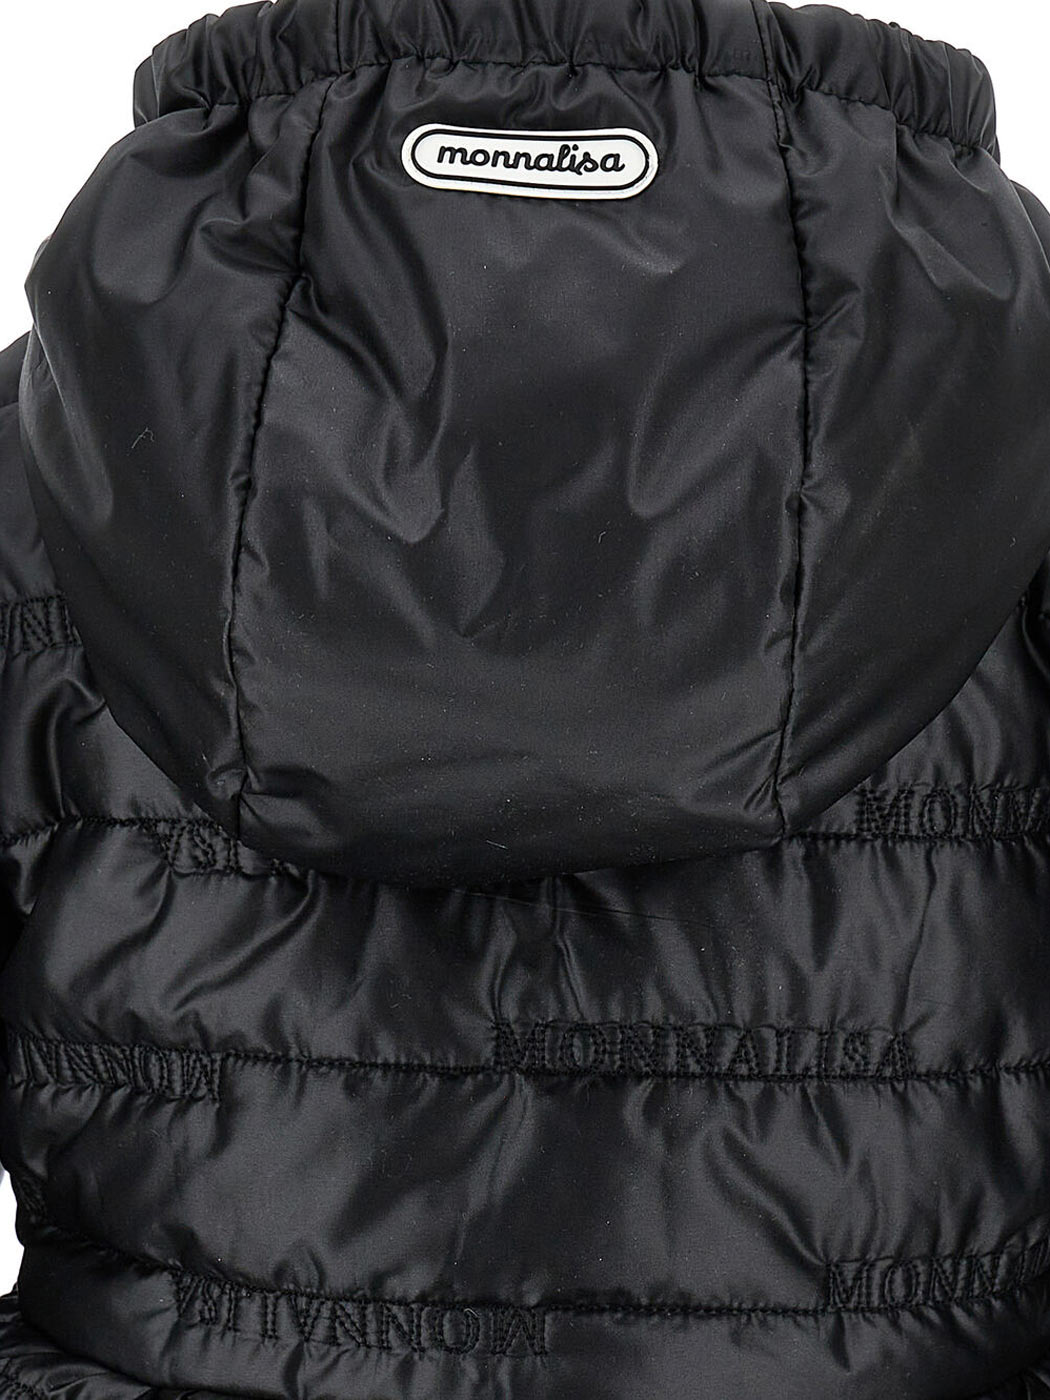 MONNALISA Quilted black girls' jacket-17A102NP